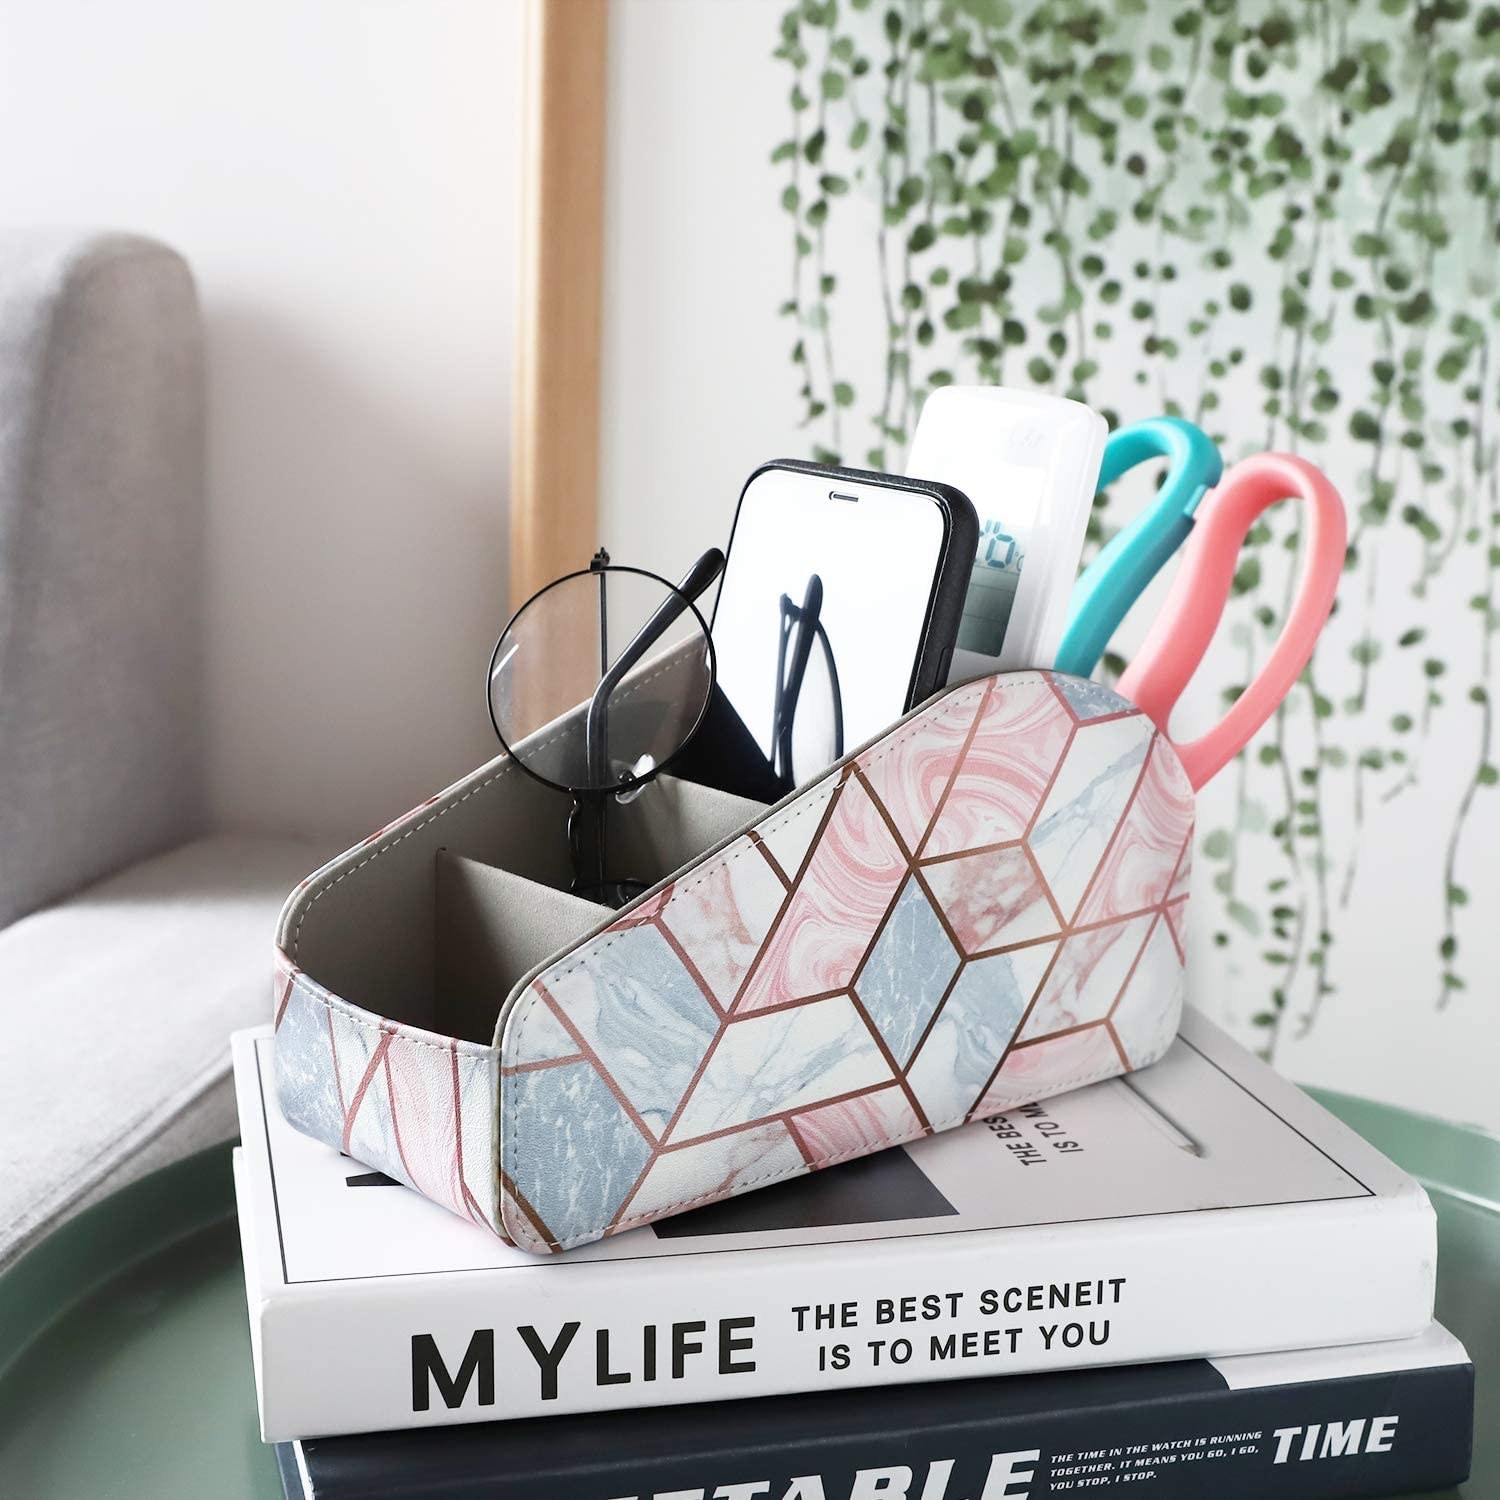 A fabric remote control organizer sitting on a stack of books  There are a pair of glasses, a phone, a remote, and a pair of scissors in a different compartment